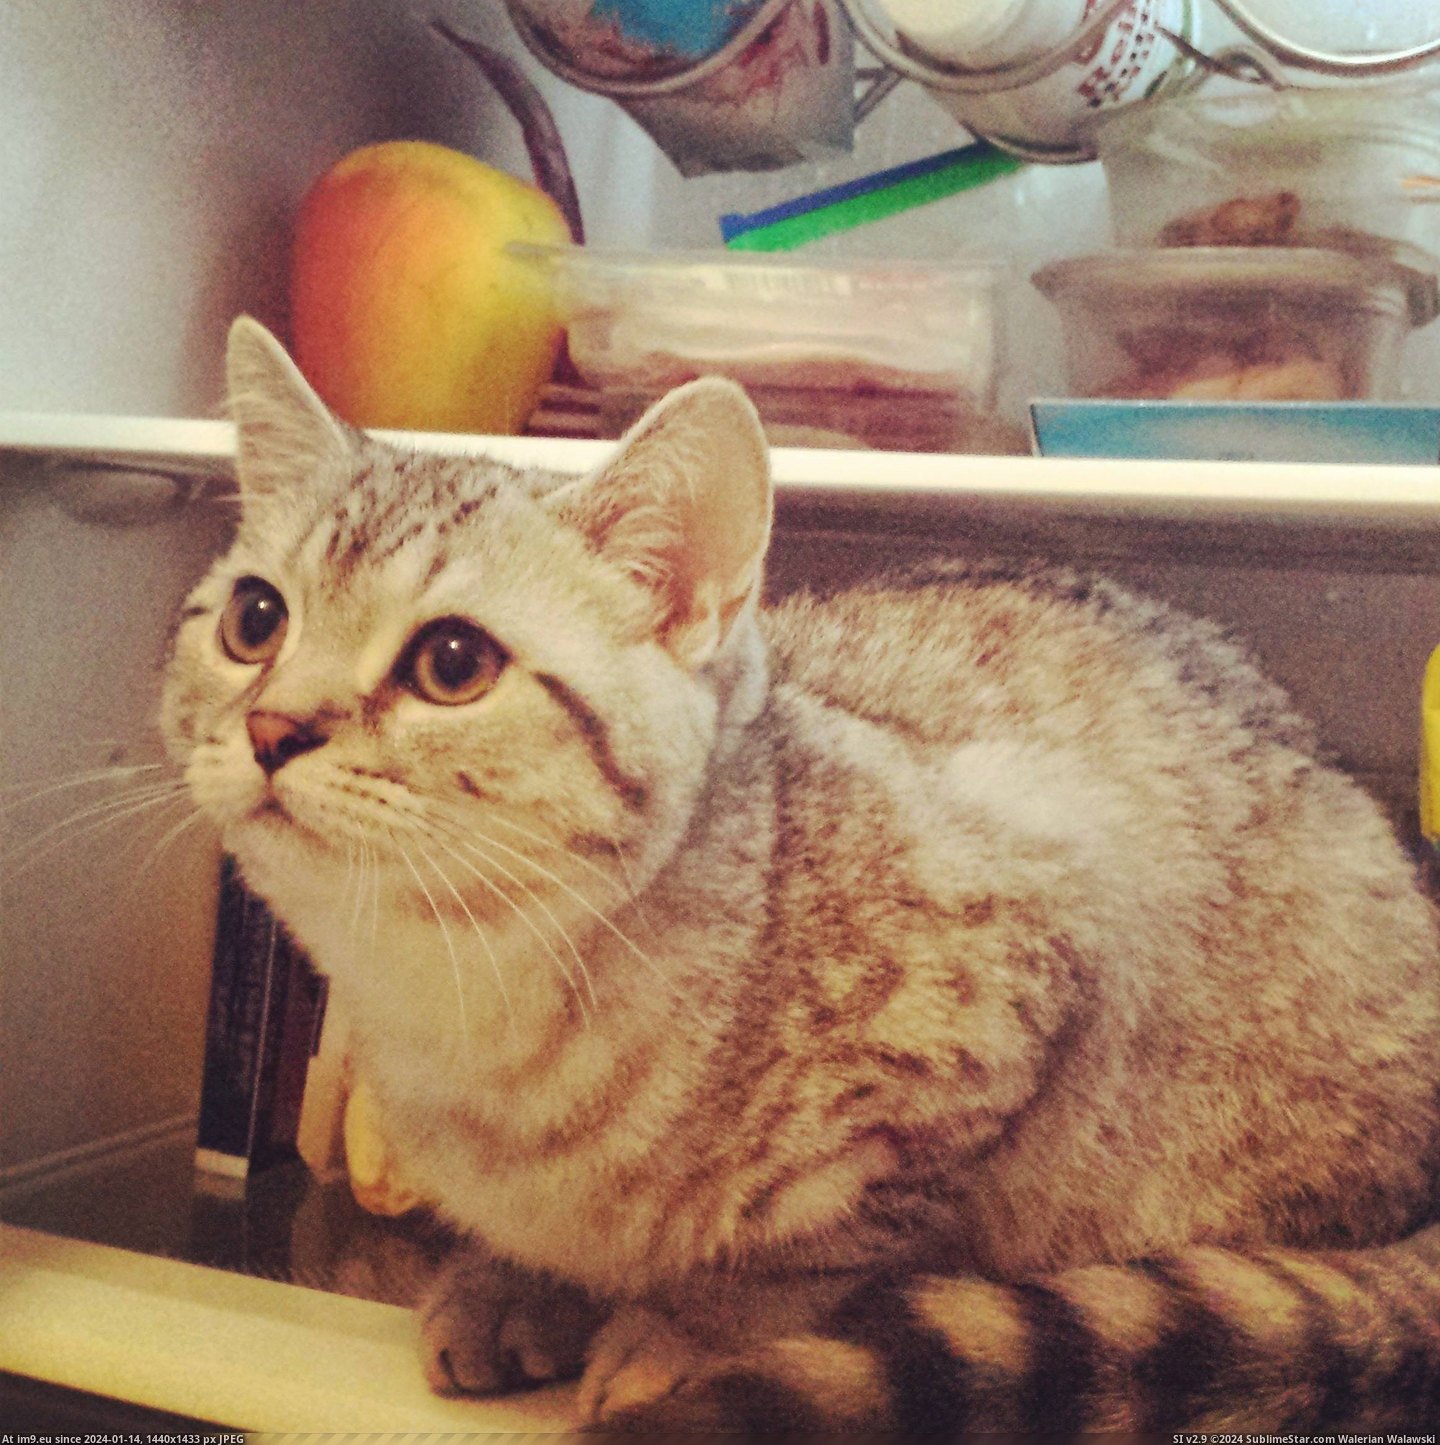 #Hot #Leave #Refuses #Jumped #Gary #Opened #Fridge [Aww] It's really hot at home, so when I opened the fridge Gary jumped in and now refuses to leave -.-' Pic. (Obraz z album My r/AWW favs))